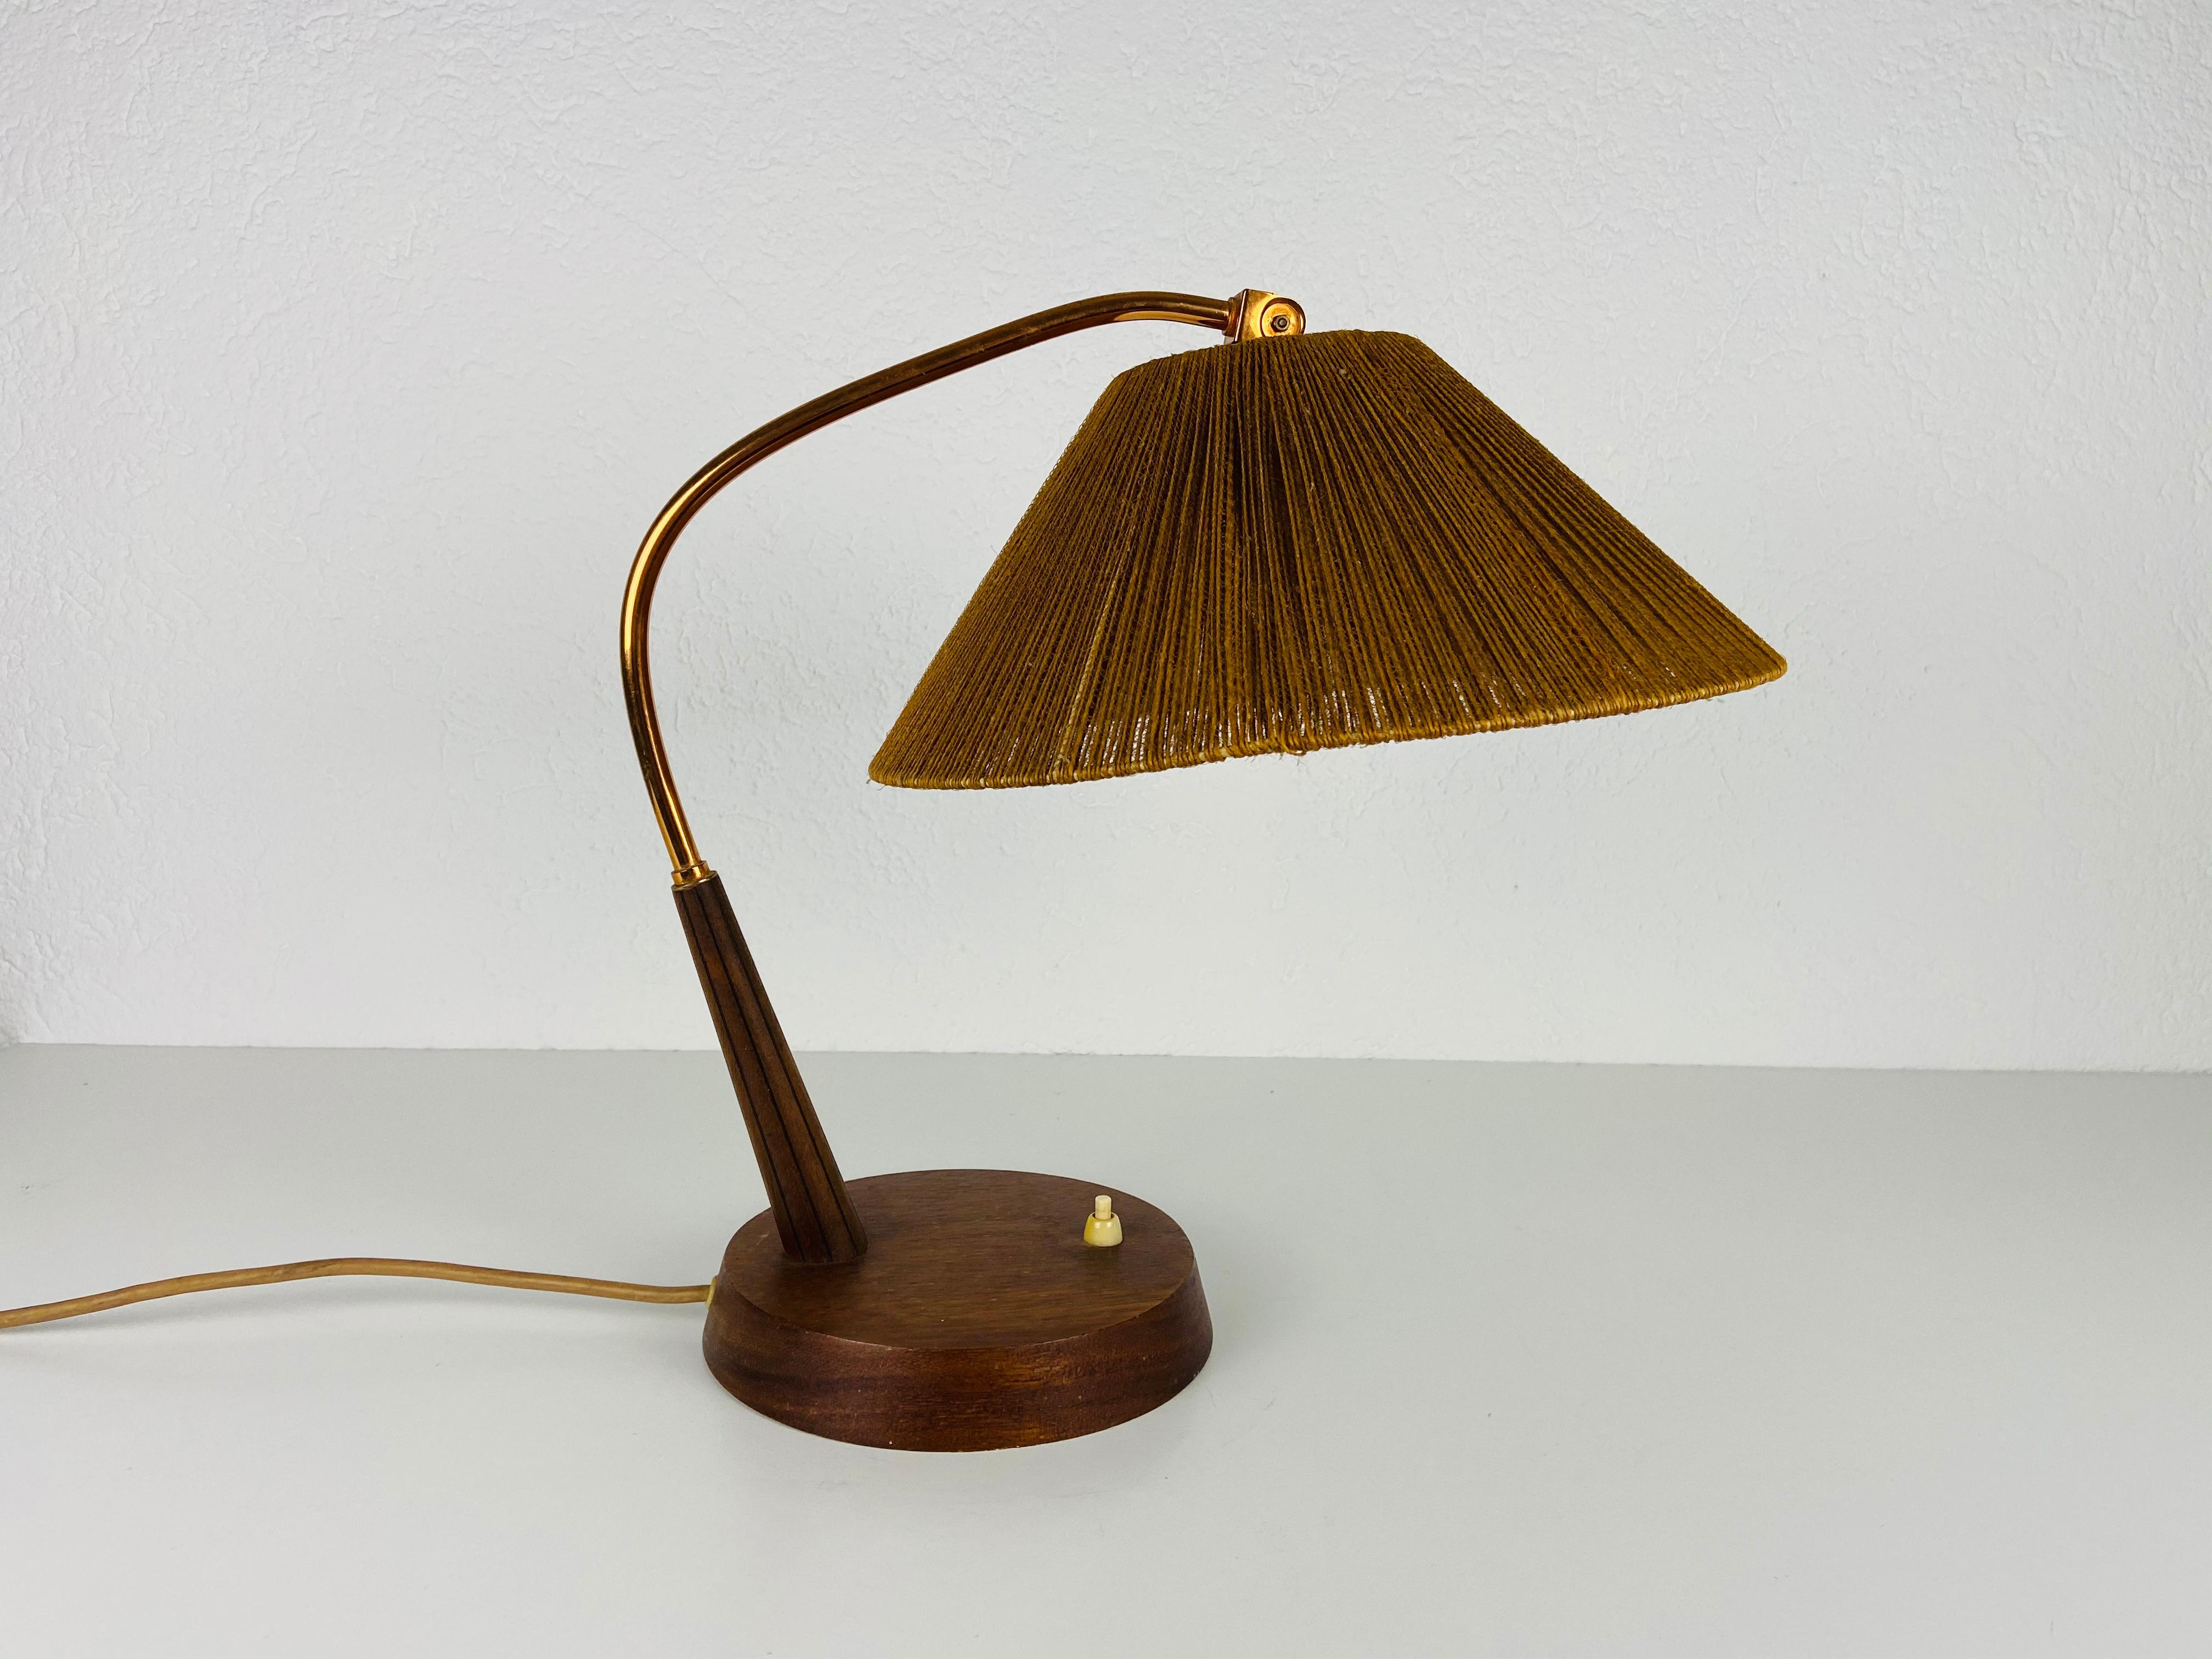 A wonderful teak table lamp made in the 1960s by Temde in Switzerland. It is fascinating with its rare lamp shade.

The light requires one E27 (US E26) light bulb. Very good vintage condition.

Free worldwide express shipping.